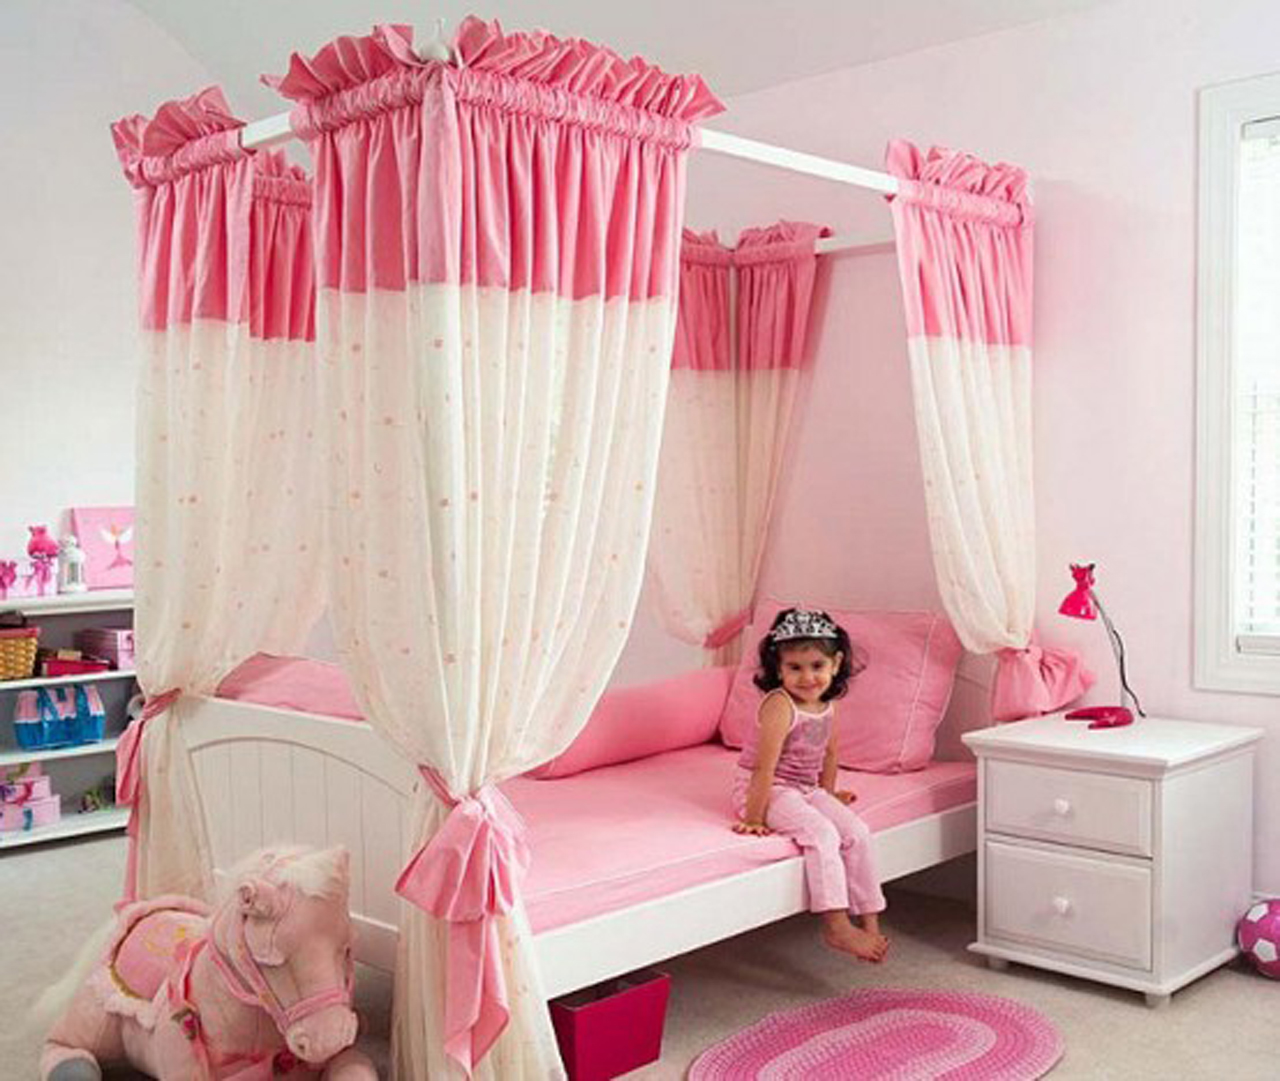 extraordinary-stunning-room-color-ideas-for-teenage-girls-pink-girls-bedrooms-design-decorations-with-two-drawer-chest-and-rugs-feats-white-vanity